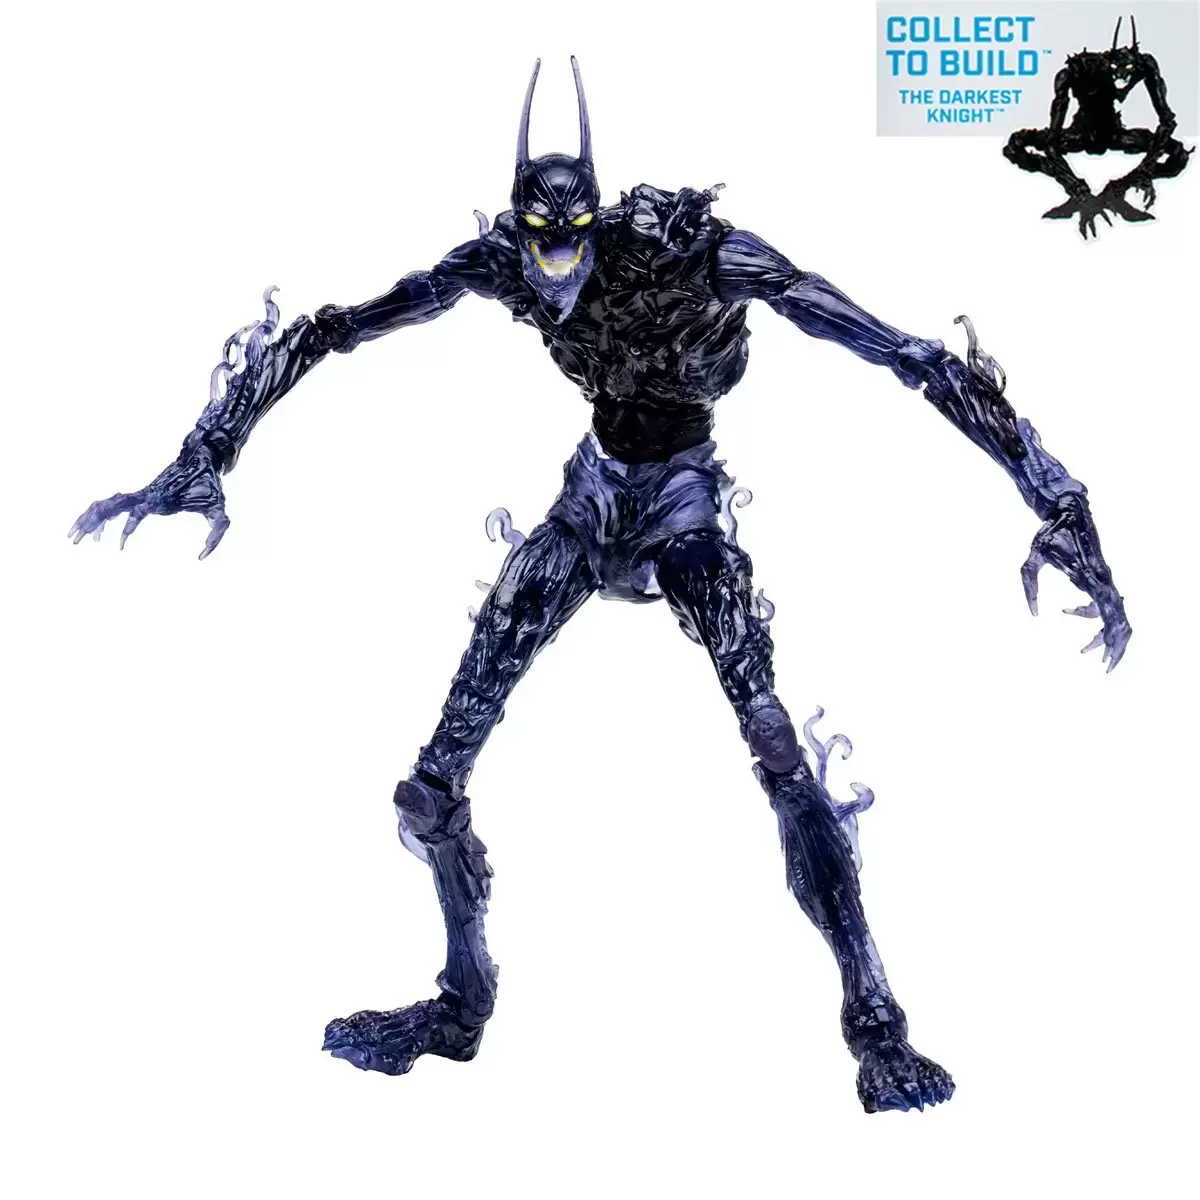 McFarlane - DC Multiverse - The Darkest Knight - Speed Metal (Collect to Build)